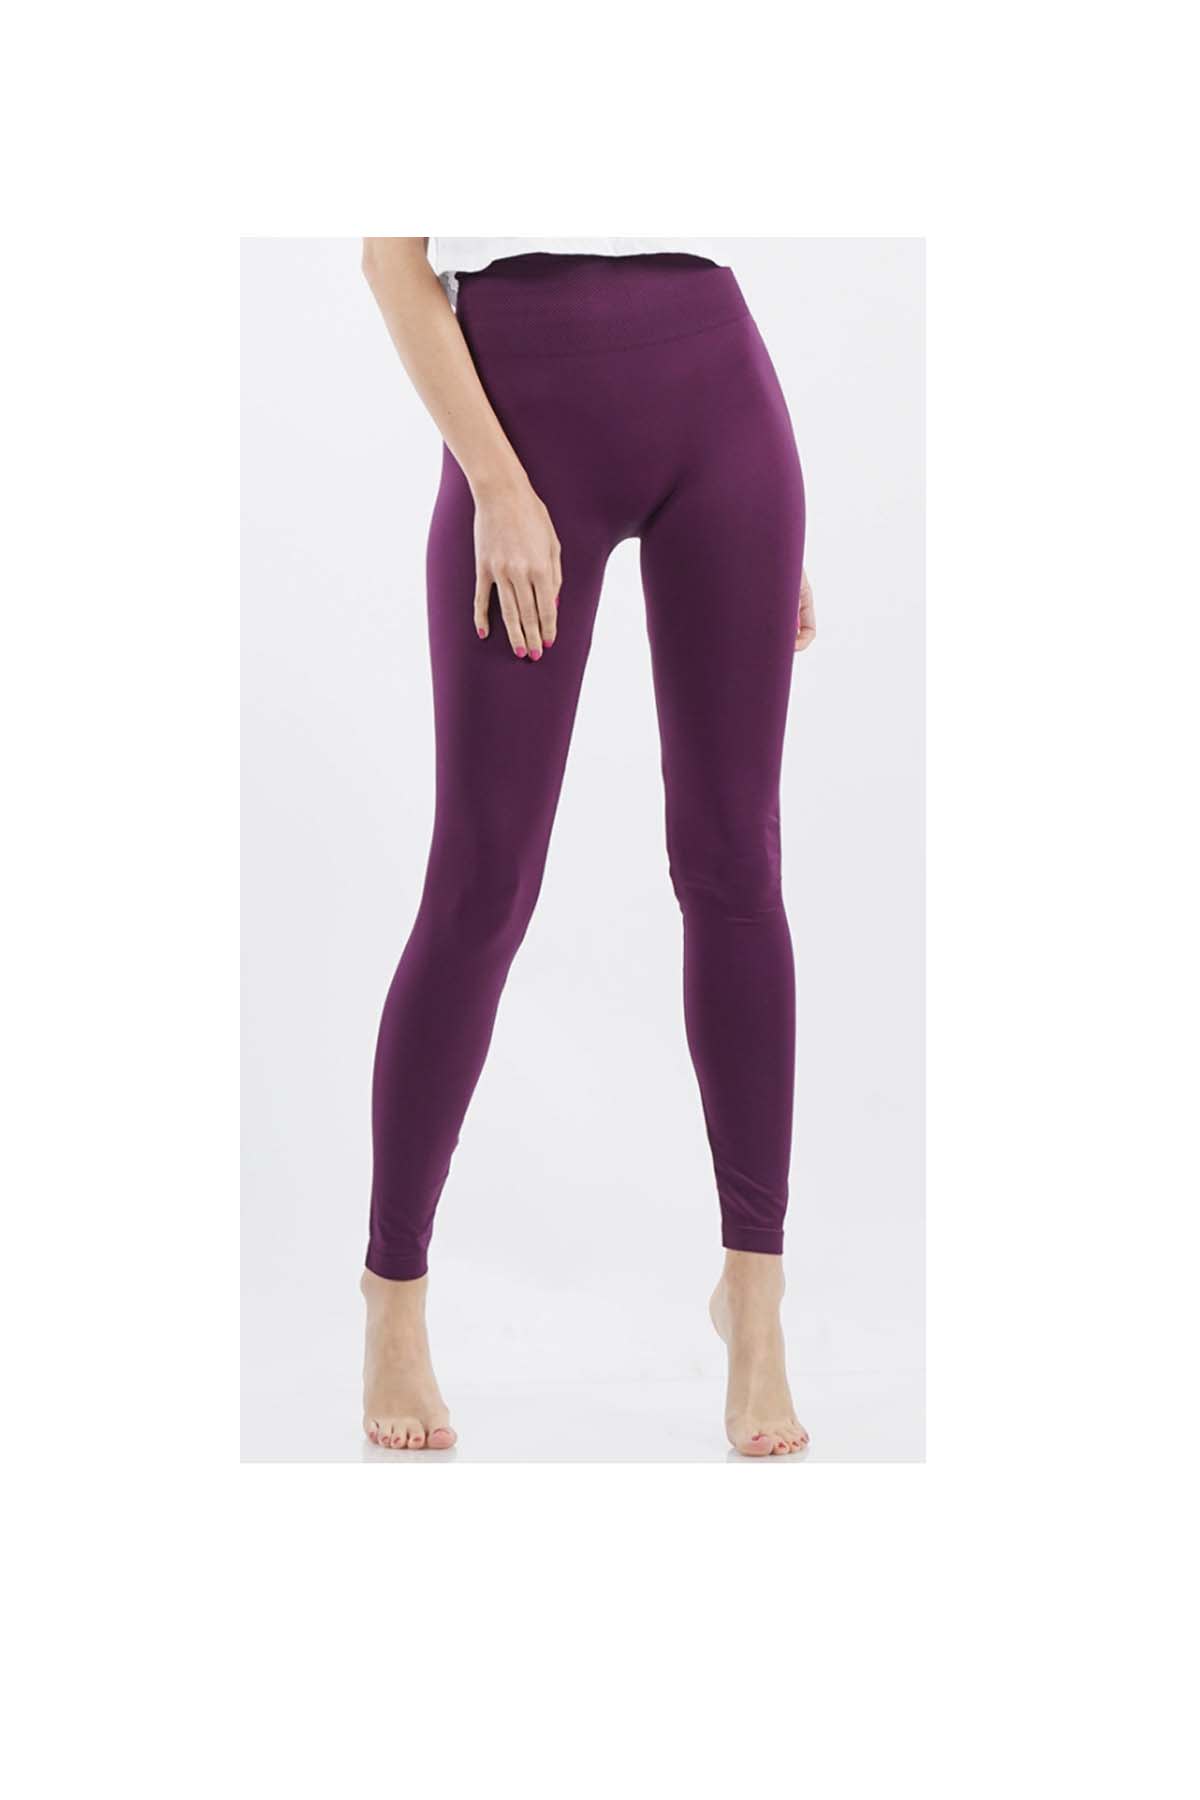 Avamo Ladies Yoga Pants Solid Color Sport Trousers Tummy Control Leggings  Casual Workout Pant Running Bottoms Purple XL 